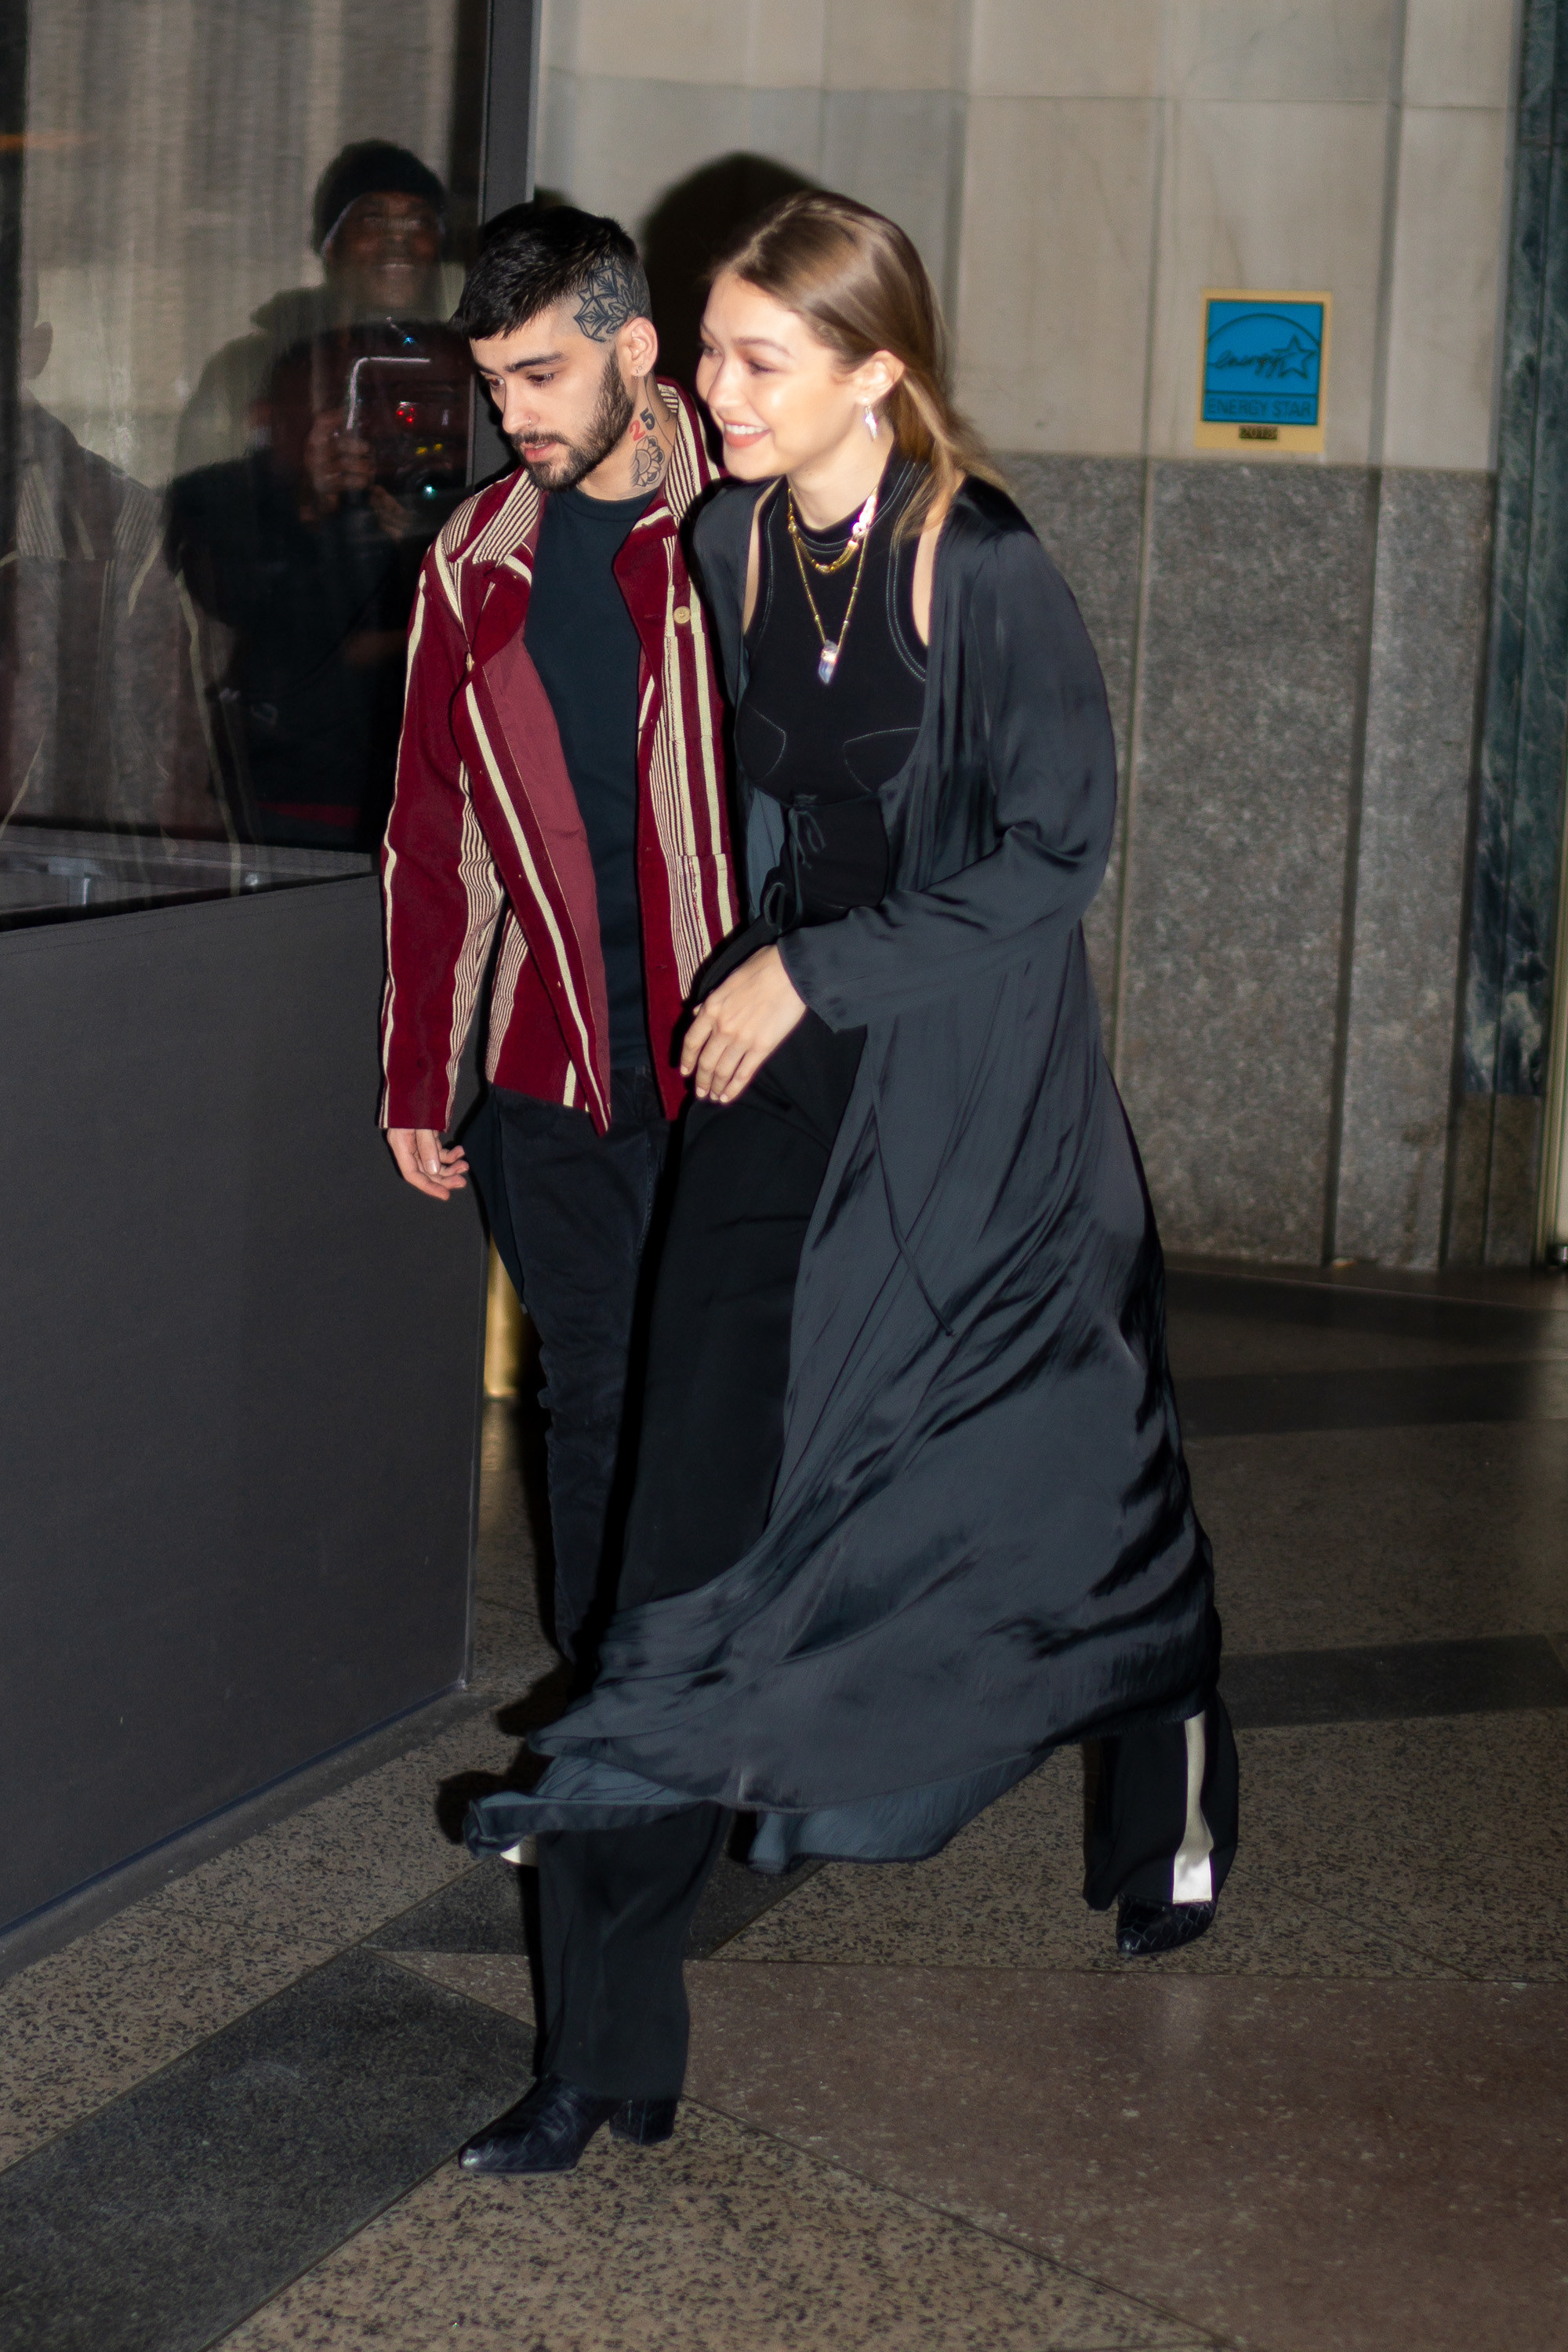 Malik and Hadid exit a buliding together